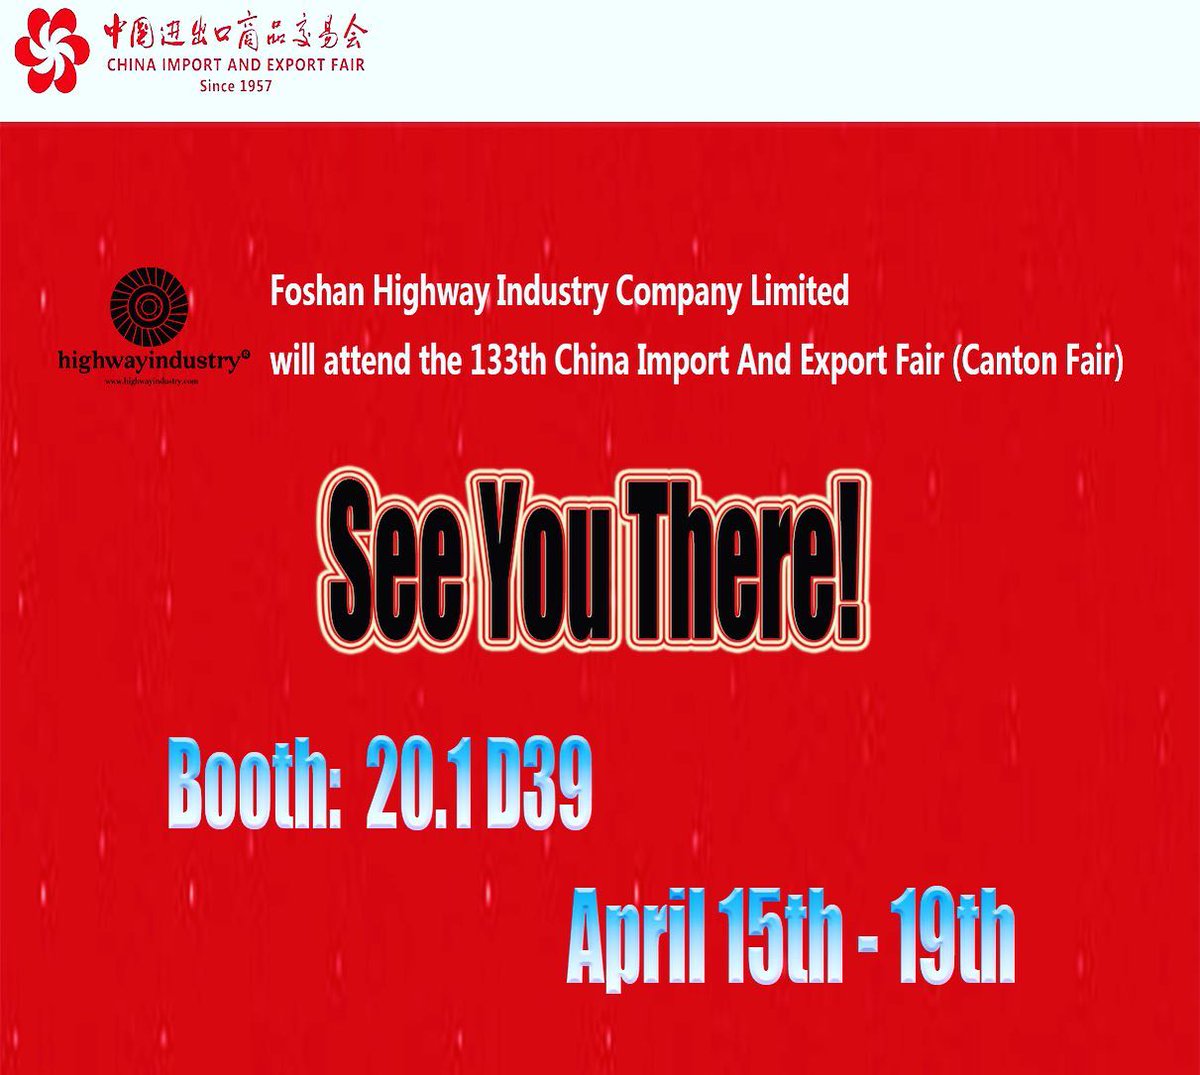 Foshan Highway Industry Company Limited will attend the 133th China Import And Export Fair (Canton Fair) on April 15th-19th. (booth：20.1 D39)I will see you there! #china #export #cantonfair #industrial #manufacturing #centrifugalfans #industrialfans